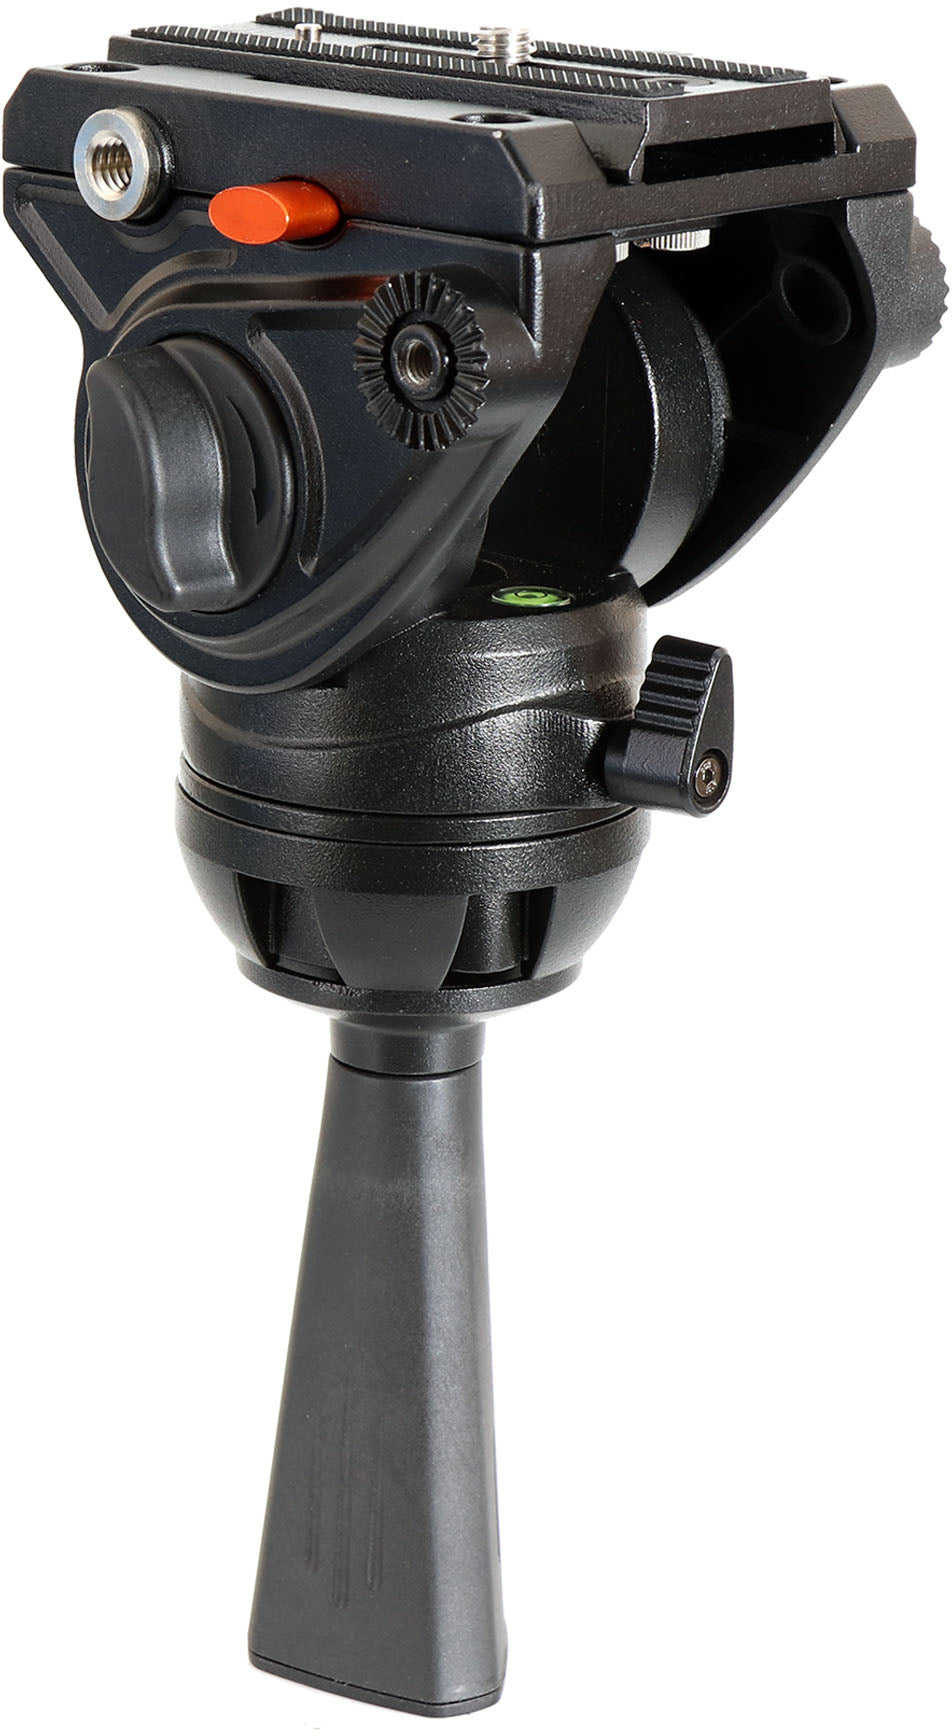 Sunpak - VideoPRO-M5 Professional Fluid Head Tripod for Full Size Camcorders and Cine Cameras_4